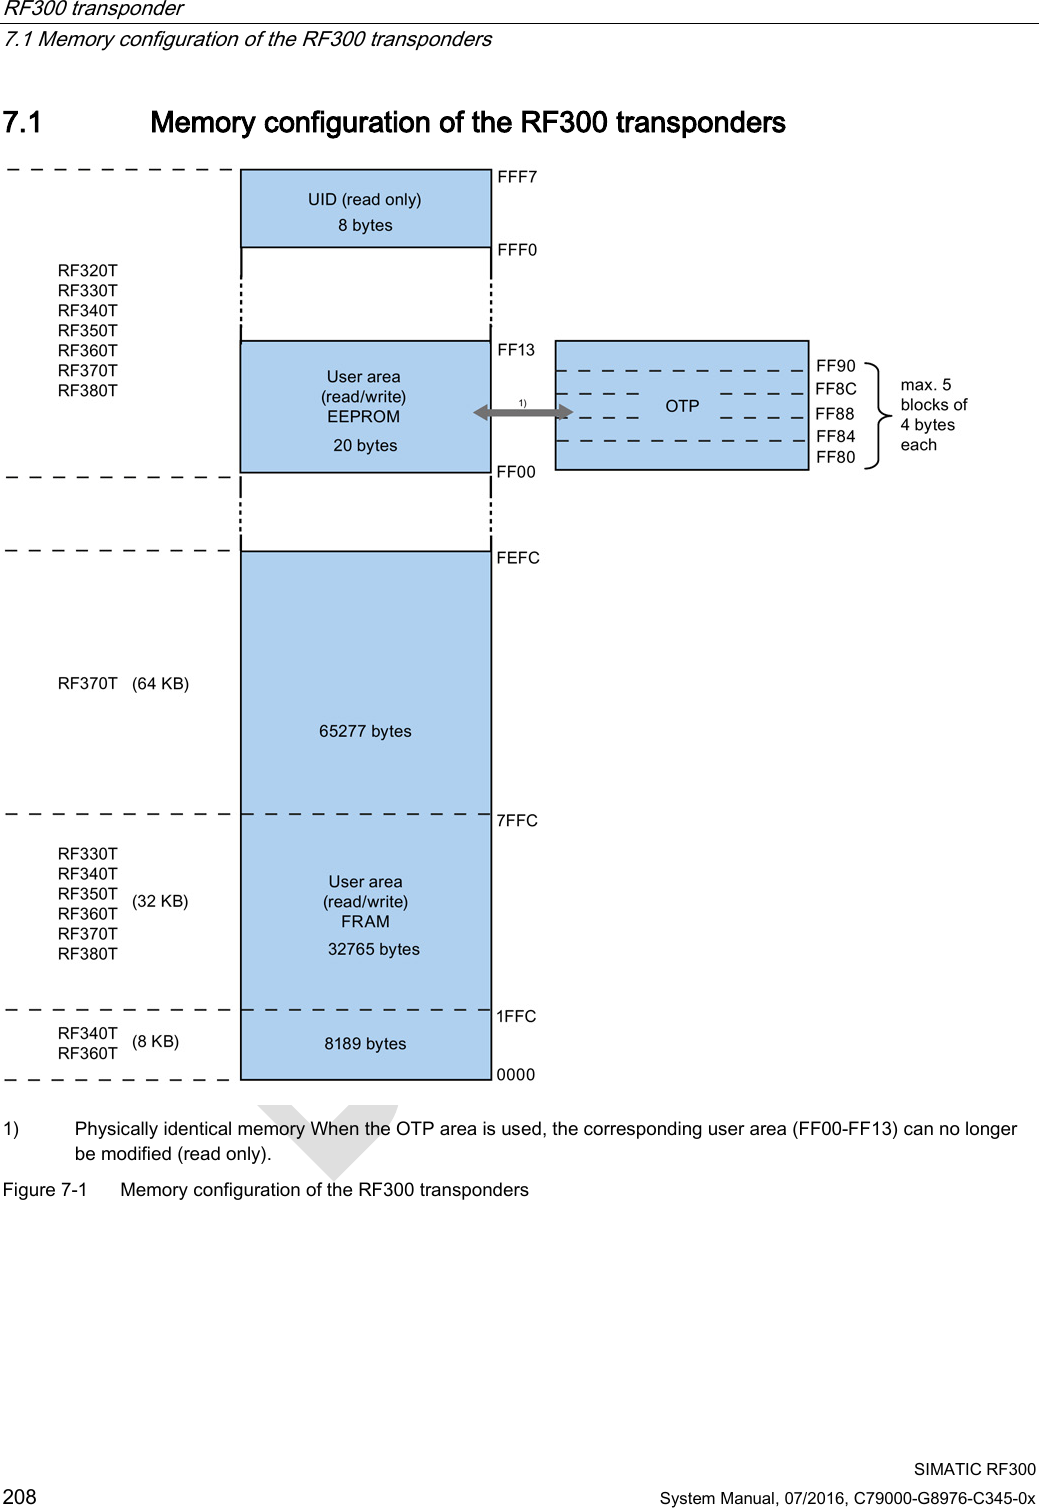 RF300 transponder   7.1 Memory configuration of the RF300 transponders  SIMATIC RF300 208 System Manual, 07/2016, C79000-G8976-C345-0x 7.1 Memory configuration of the RF300 transponders  1) Physically identical memory When the OTP area is used, the corresponding user area (FF00-FF13) can no longer be modified (read only). Figure 7-1  Memory configuration of the RF300 transponders  